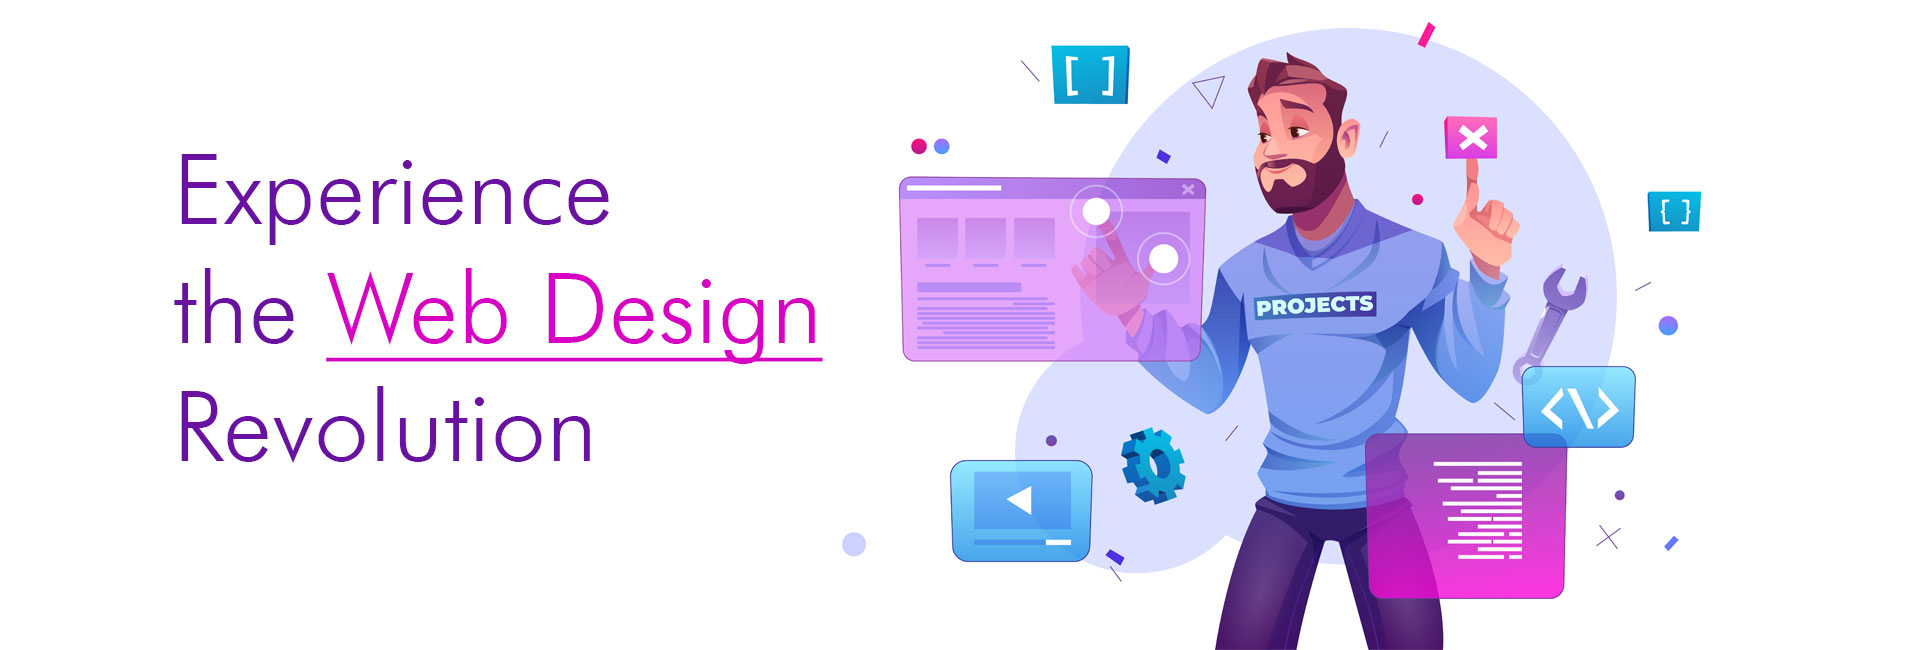 Web Design and Development Services by Ascenteck in Mumbai, India